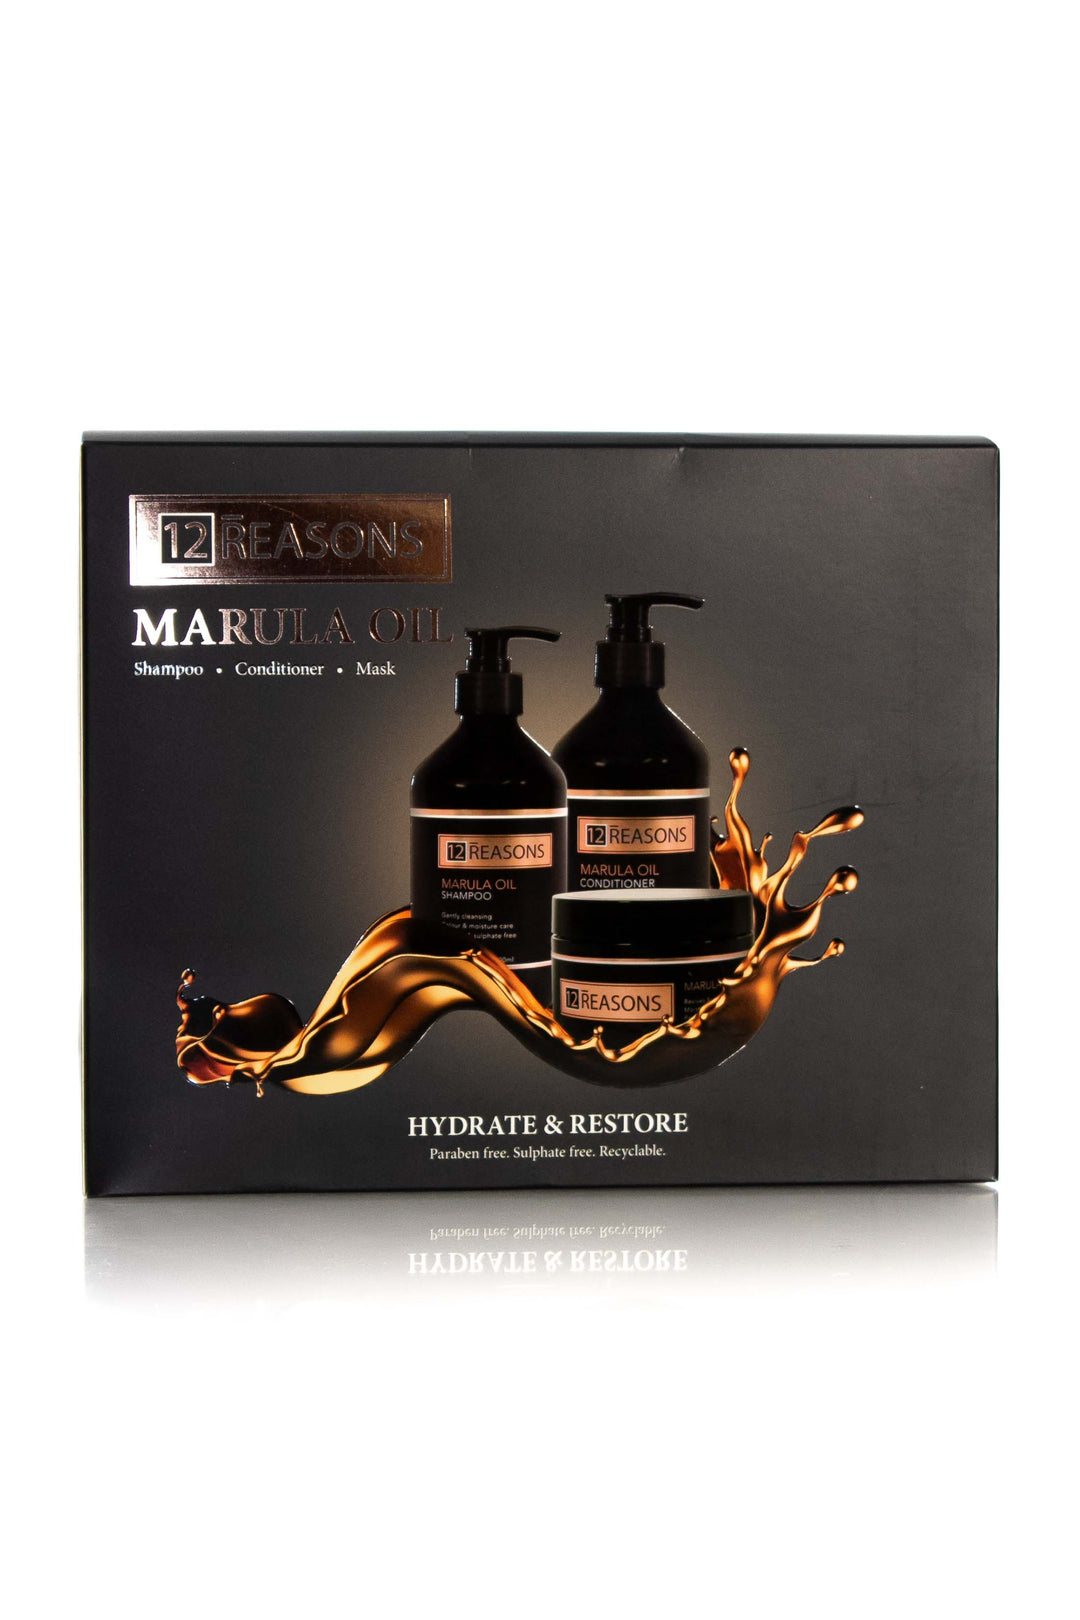 12 REASONS MARULA PACK WITH MASK